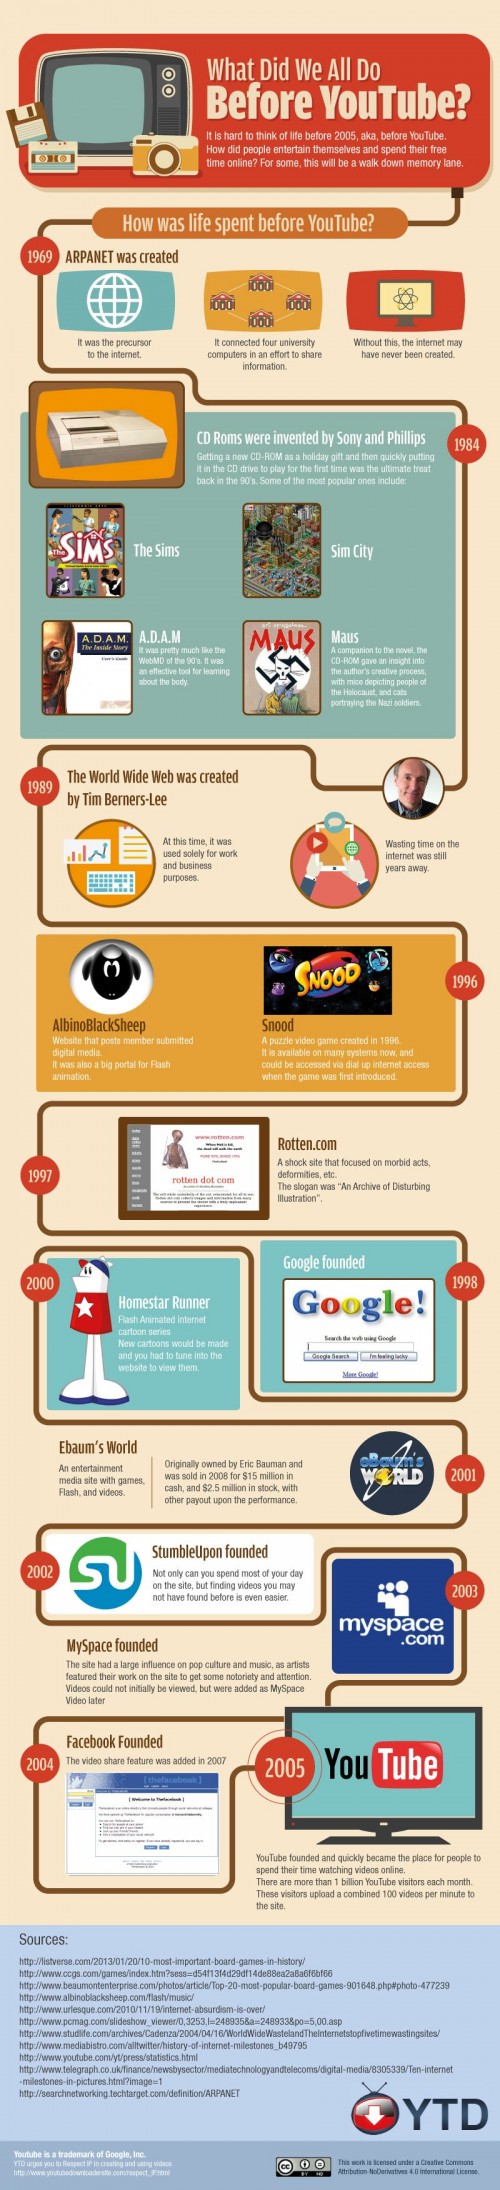 What did we all do before YouTube? Infographic by YTD for ViralBlog.com